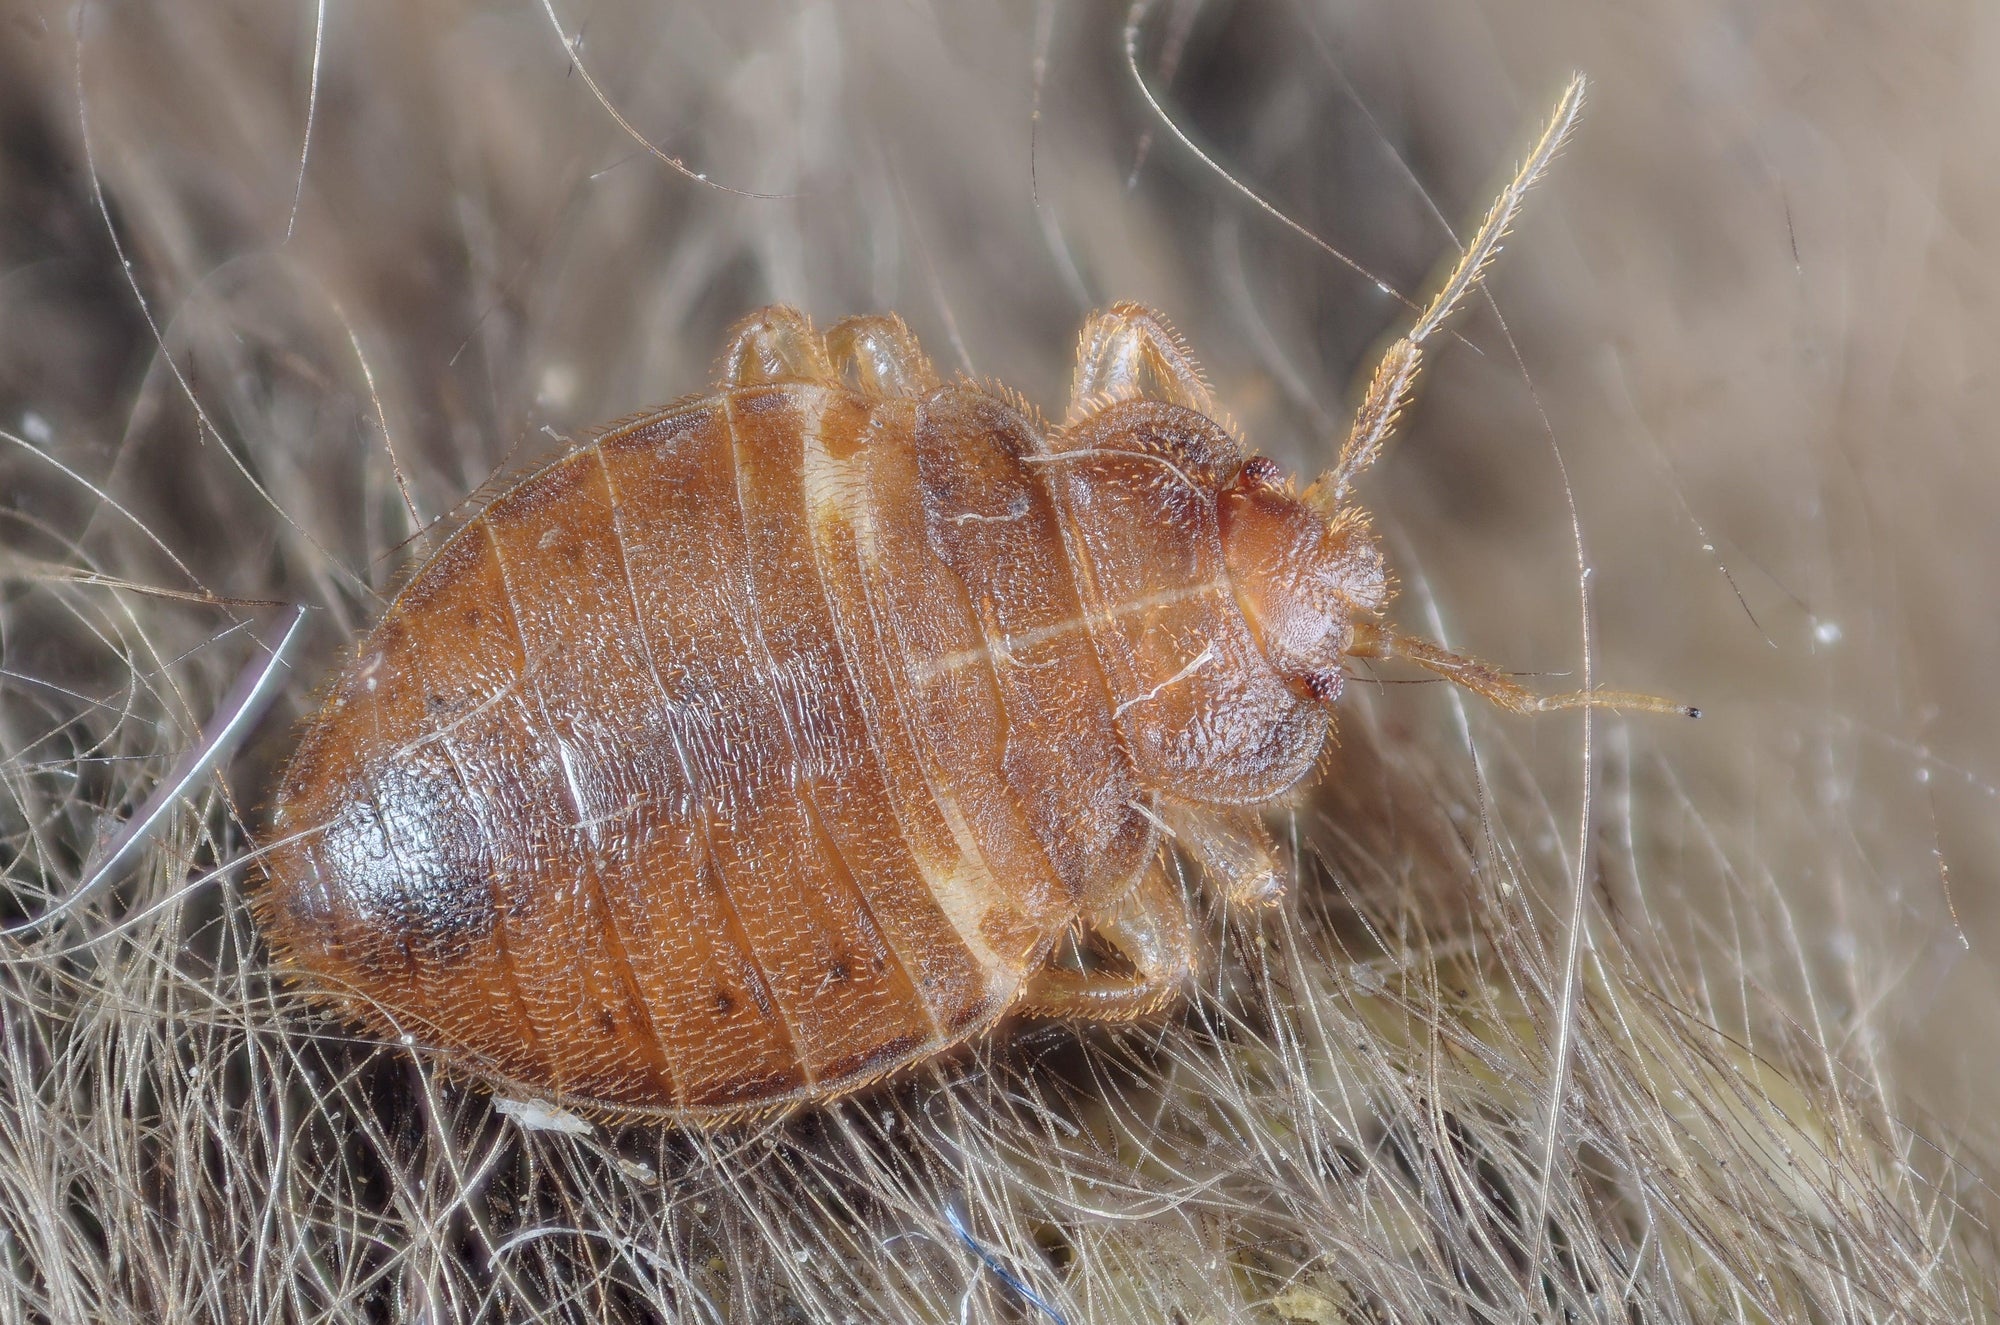 How to Get Rid of Bedbugs